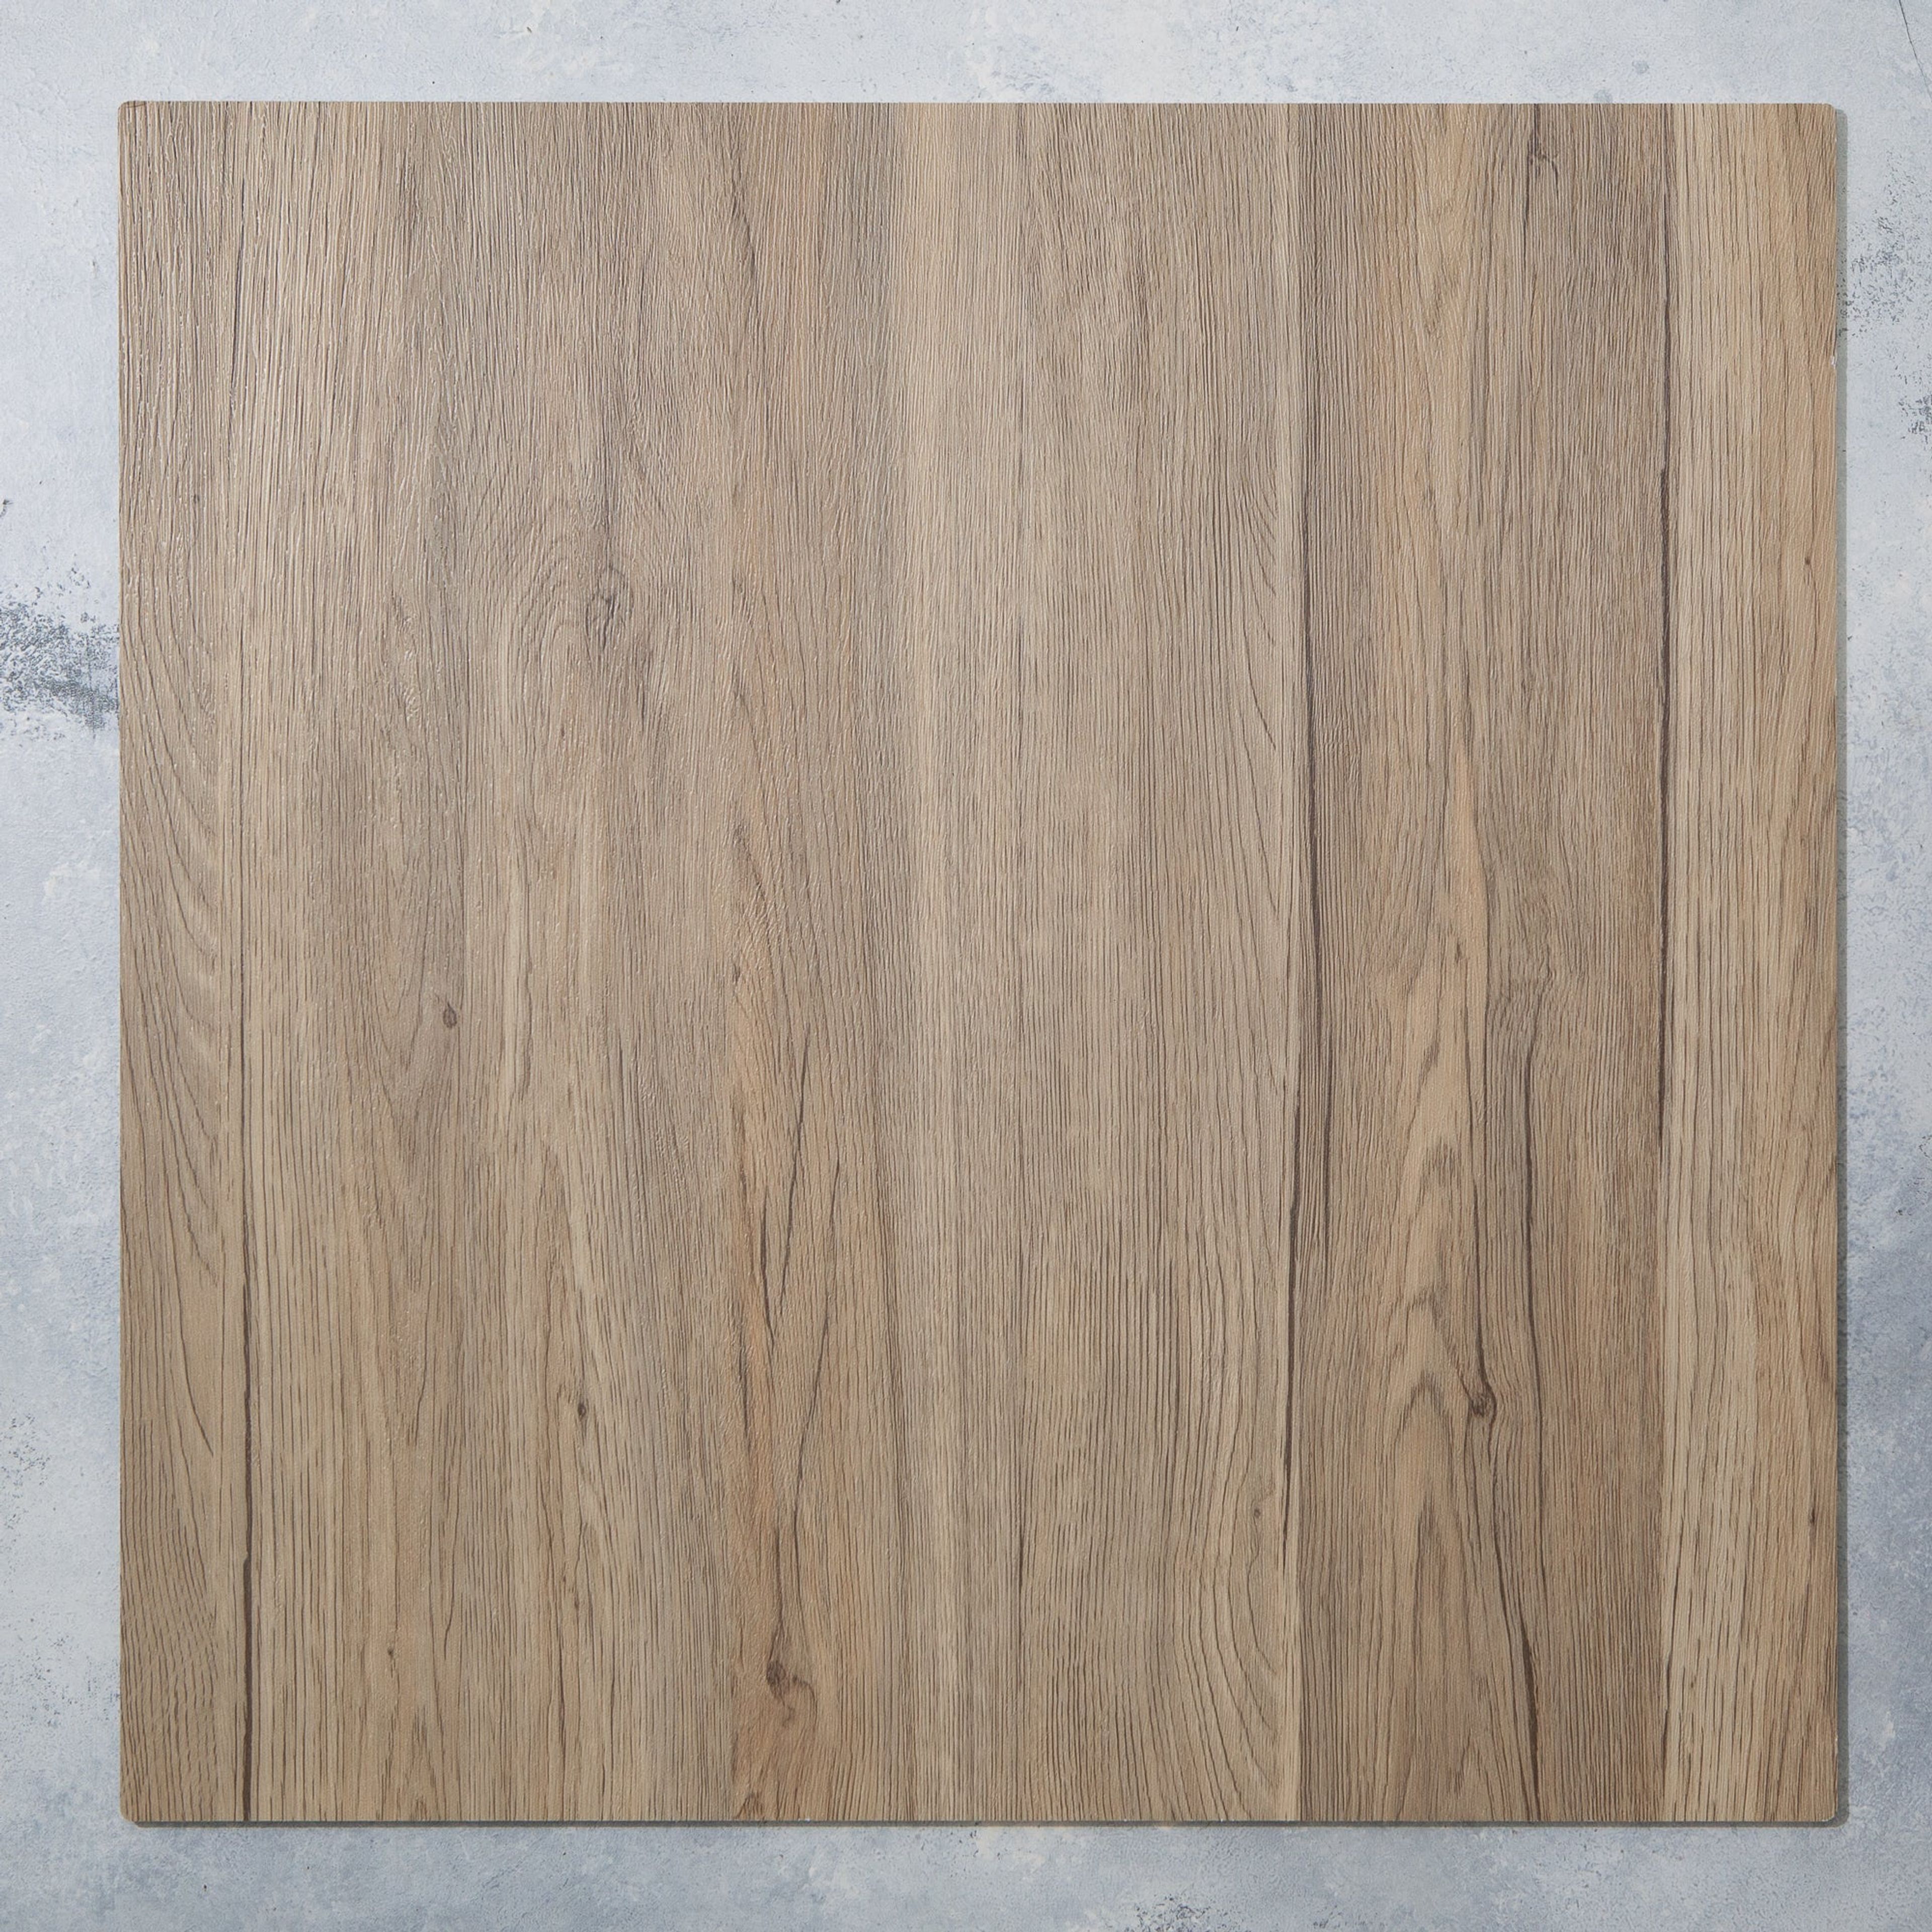 Canvas SURFACE Backdrops - Double-sided Light Wood